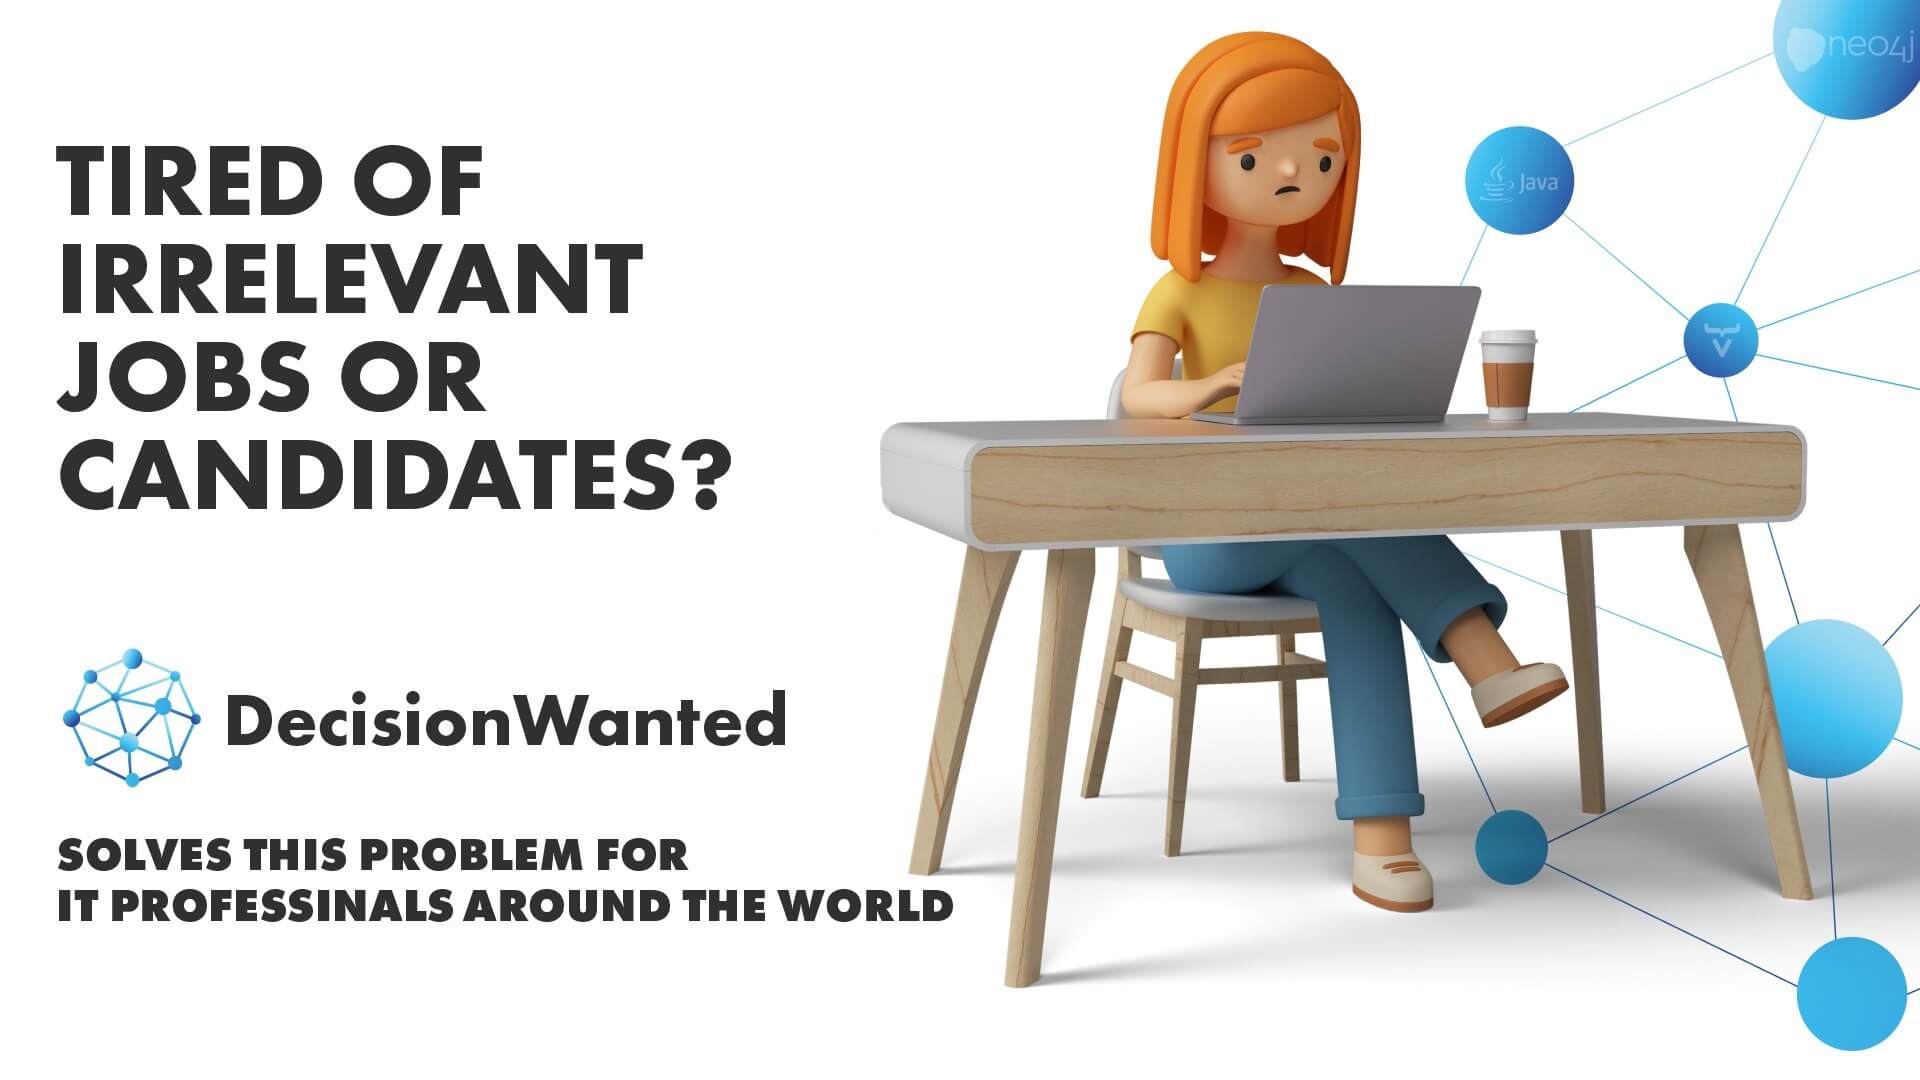 Each posted job on DecisionWanted.com is actually a competency matrix. The system automatically analyzes the compliance of jobs with the candidate profiles and provides relevant recommendations. Thanks to AI-based developments, the system is constantly self-learning, deeply examines the candidate's profile and job requirements, and provides the most relevant recommendations.